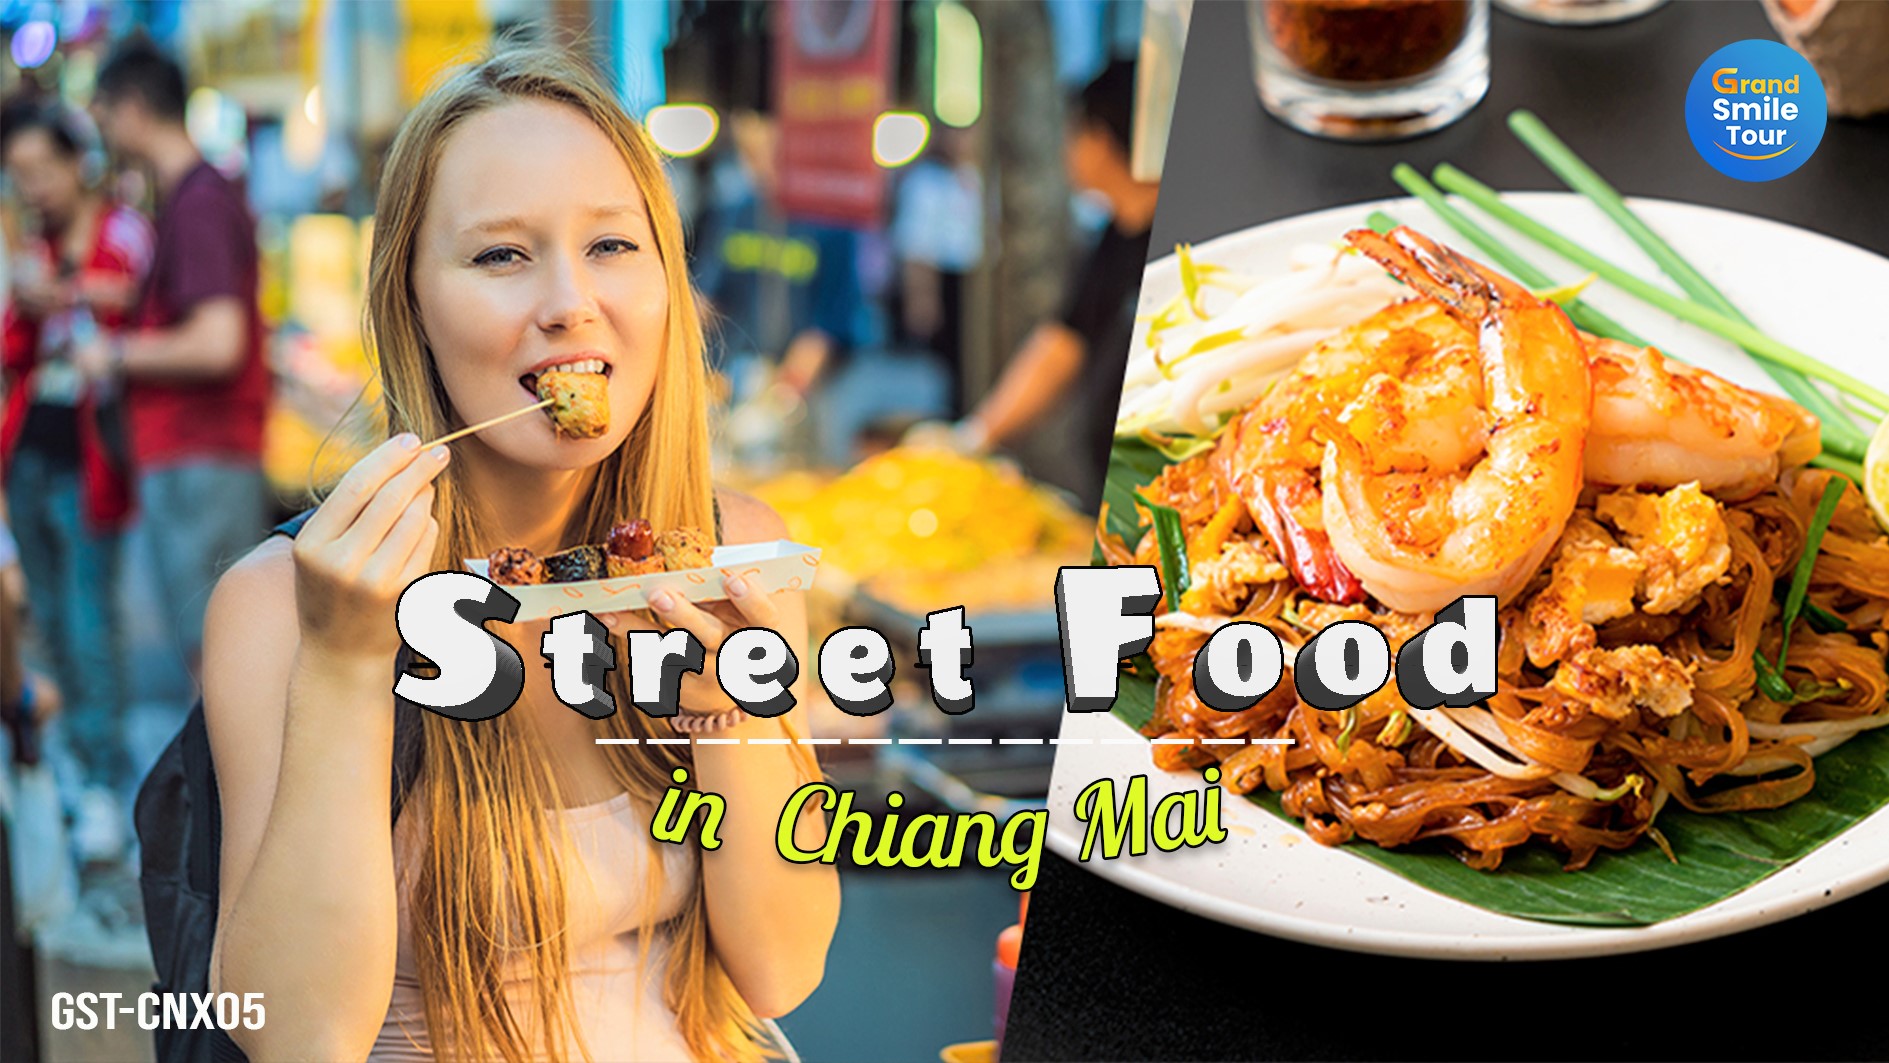 GST-CNX05 Sreet Food Tour in Chiang Mai